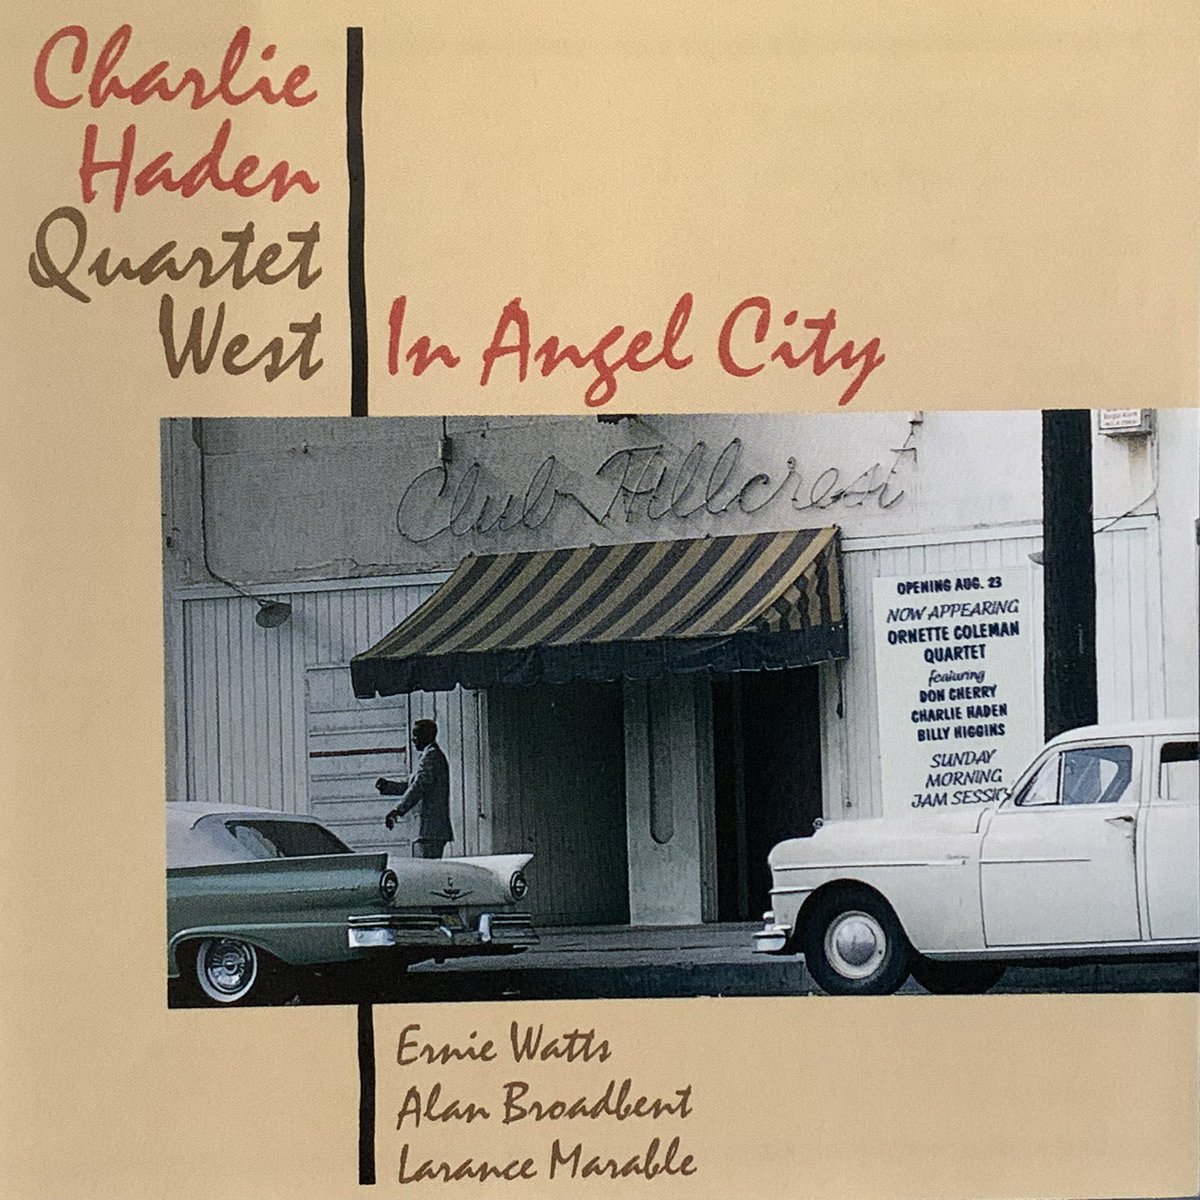 Charlie Haden Quartet West In Angel City Recorded May 30, 1988